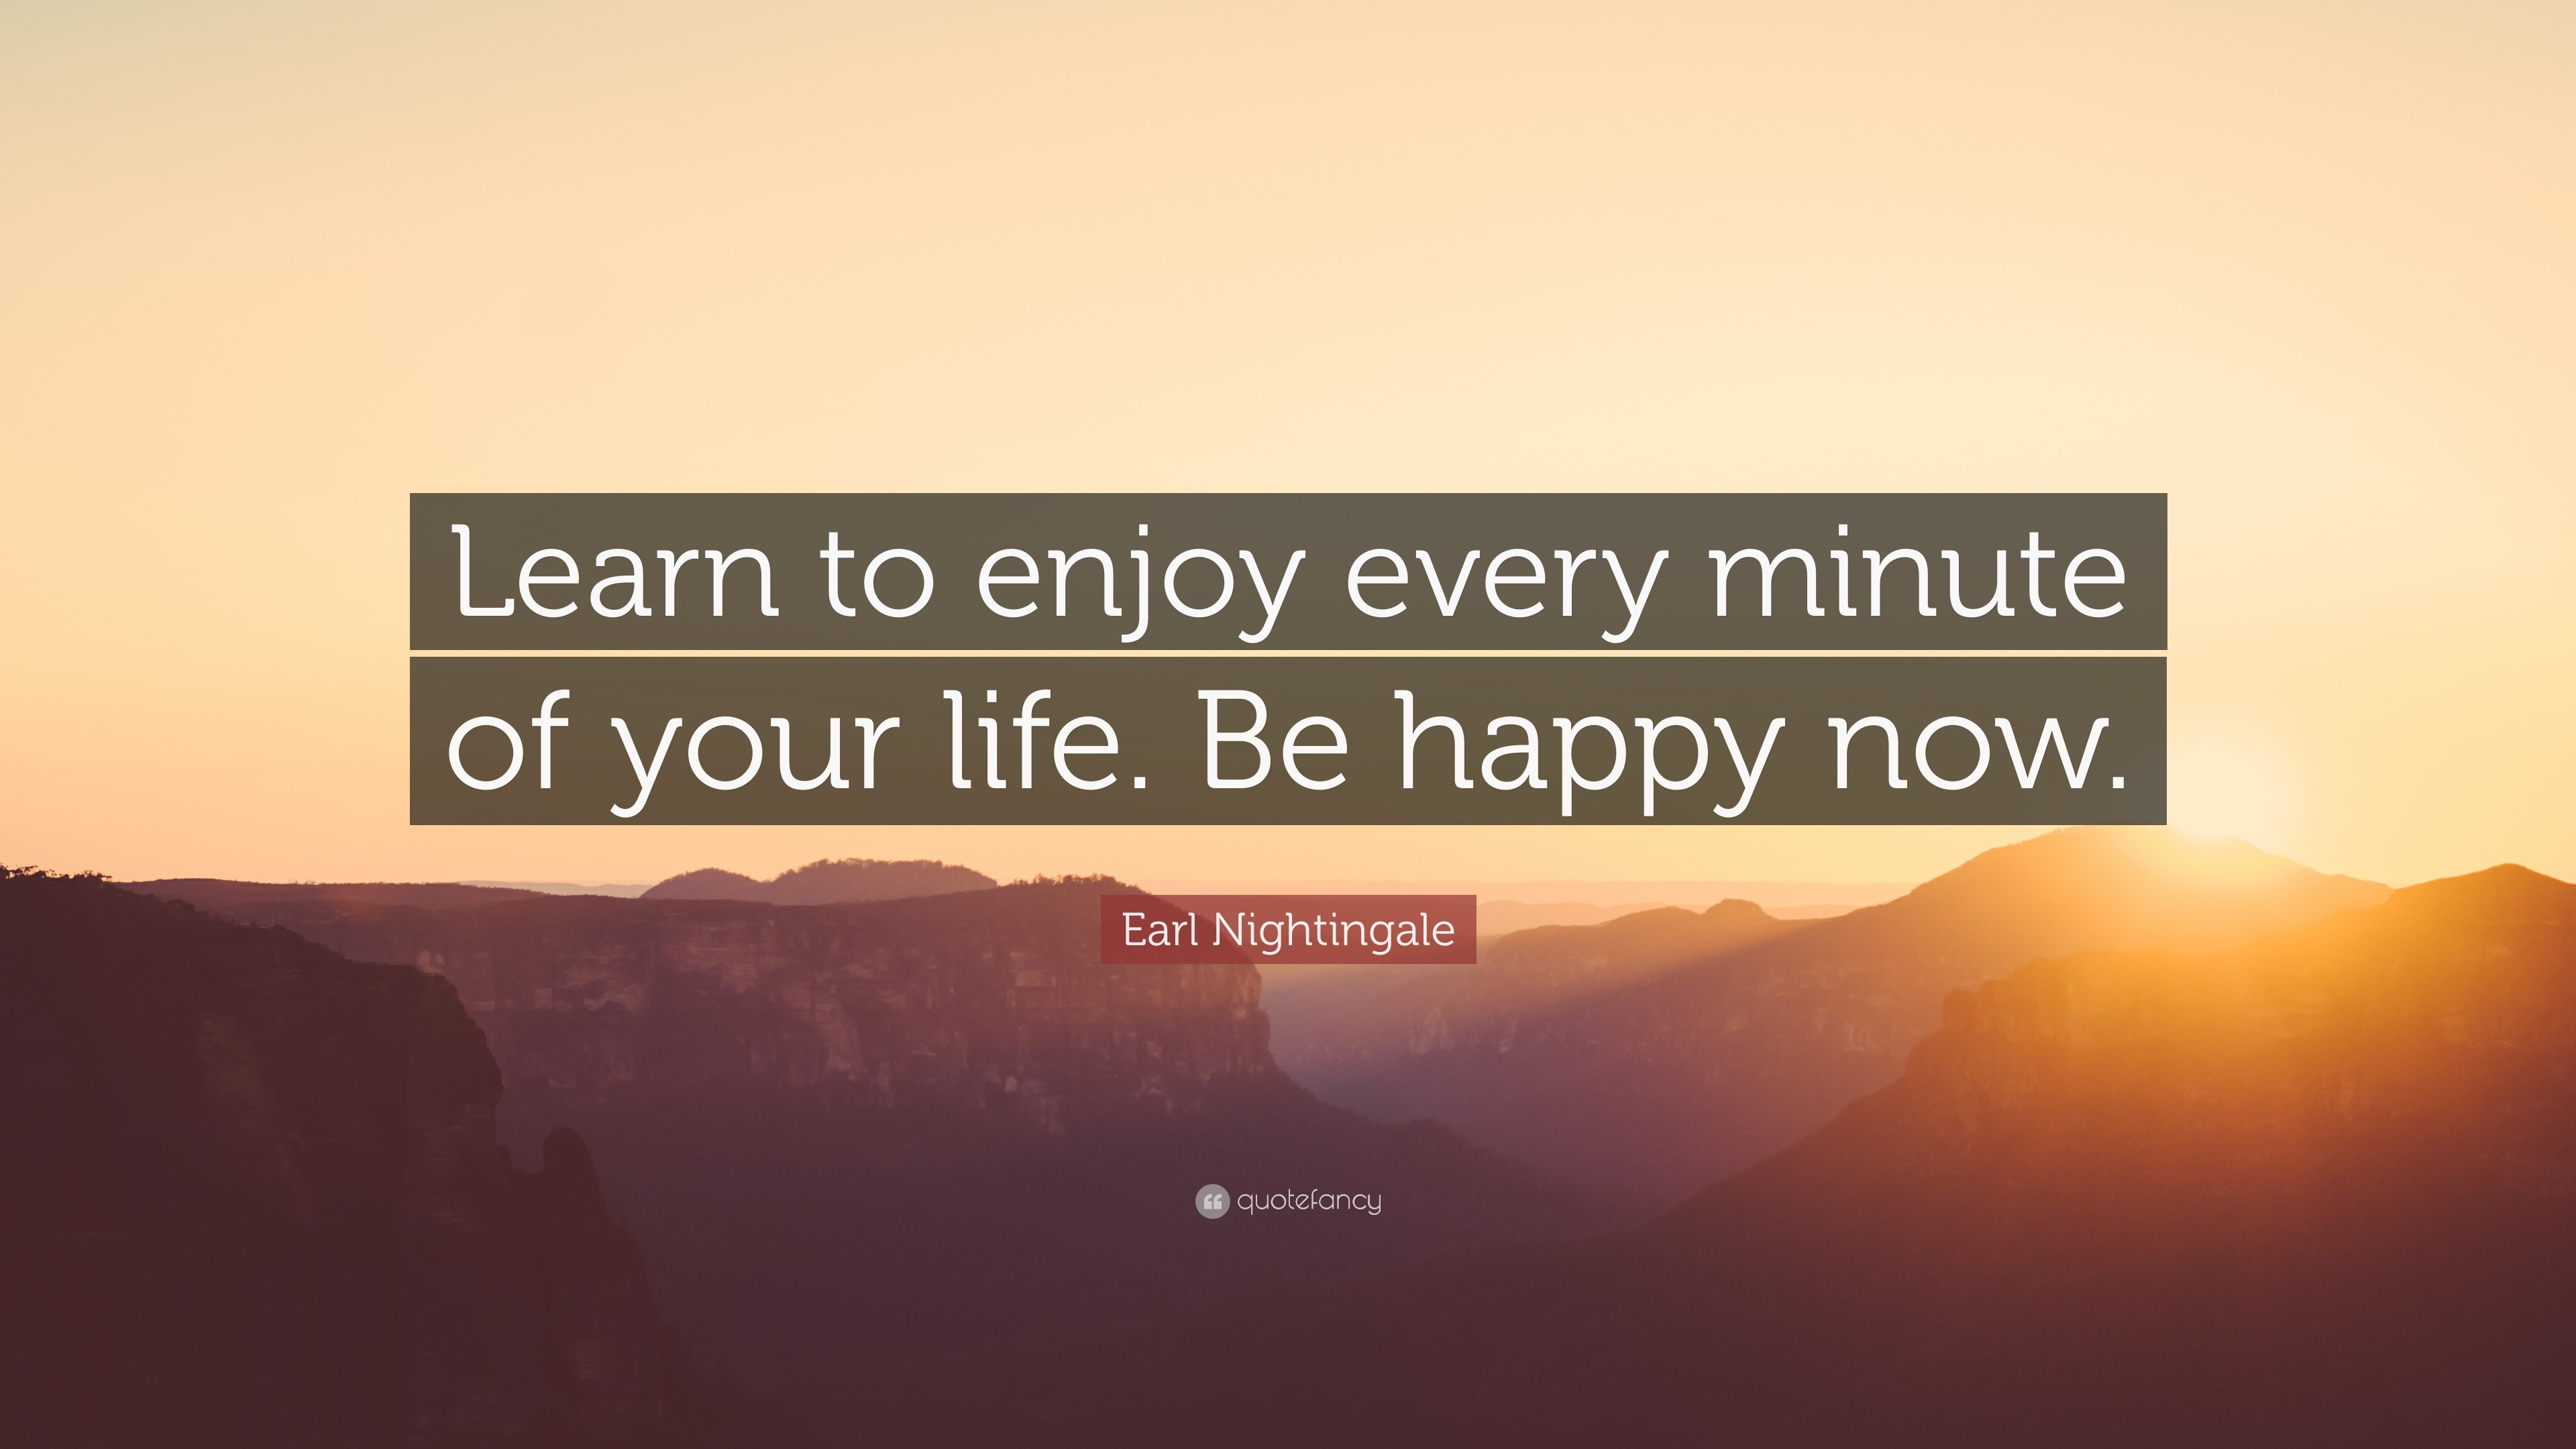 Earl Nightingale Quote “Learn to enjoy every minute of your life Be happy